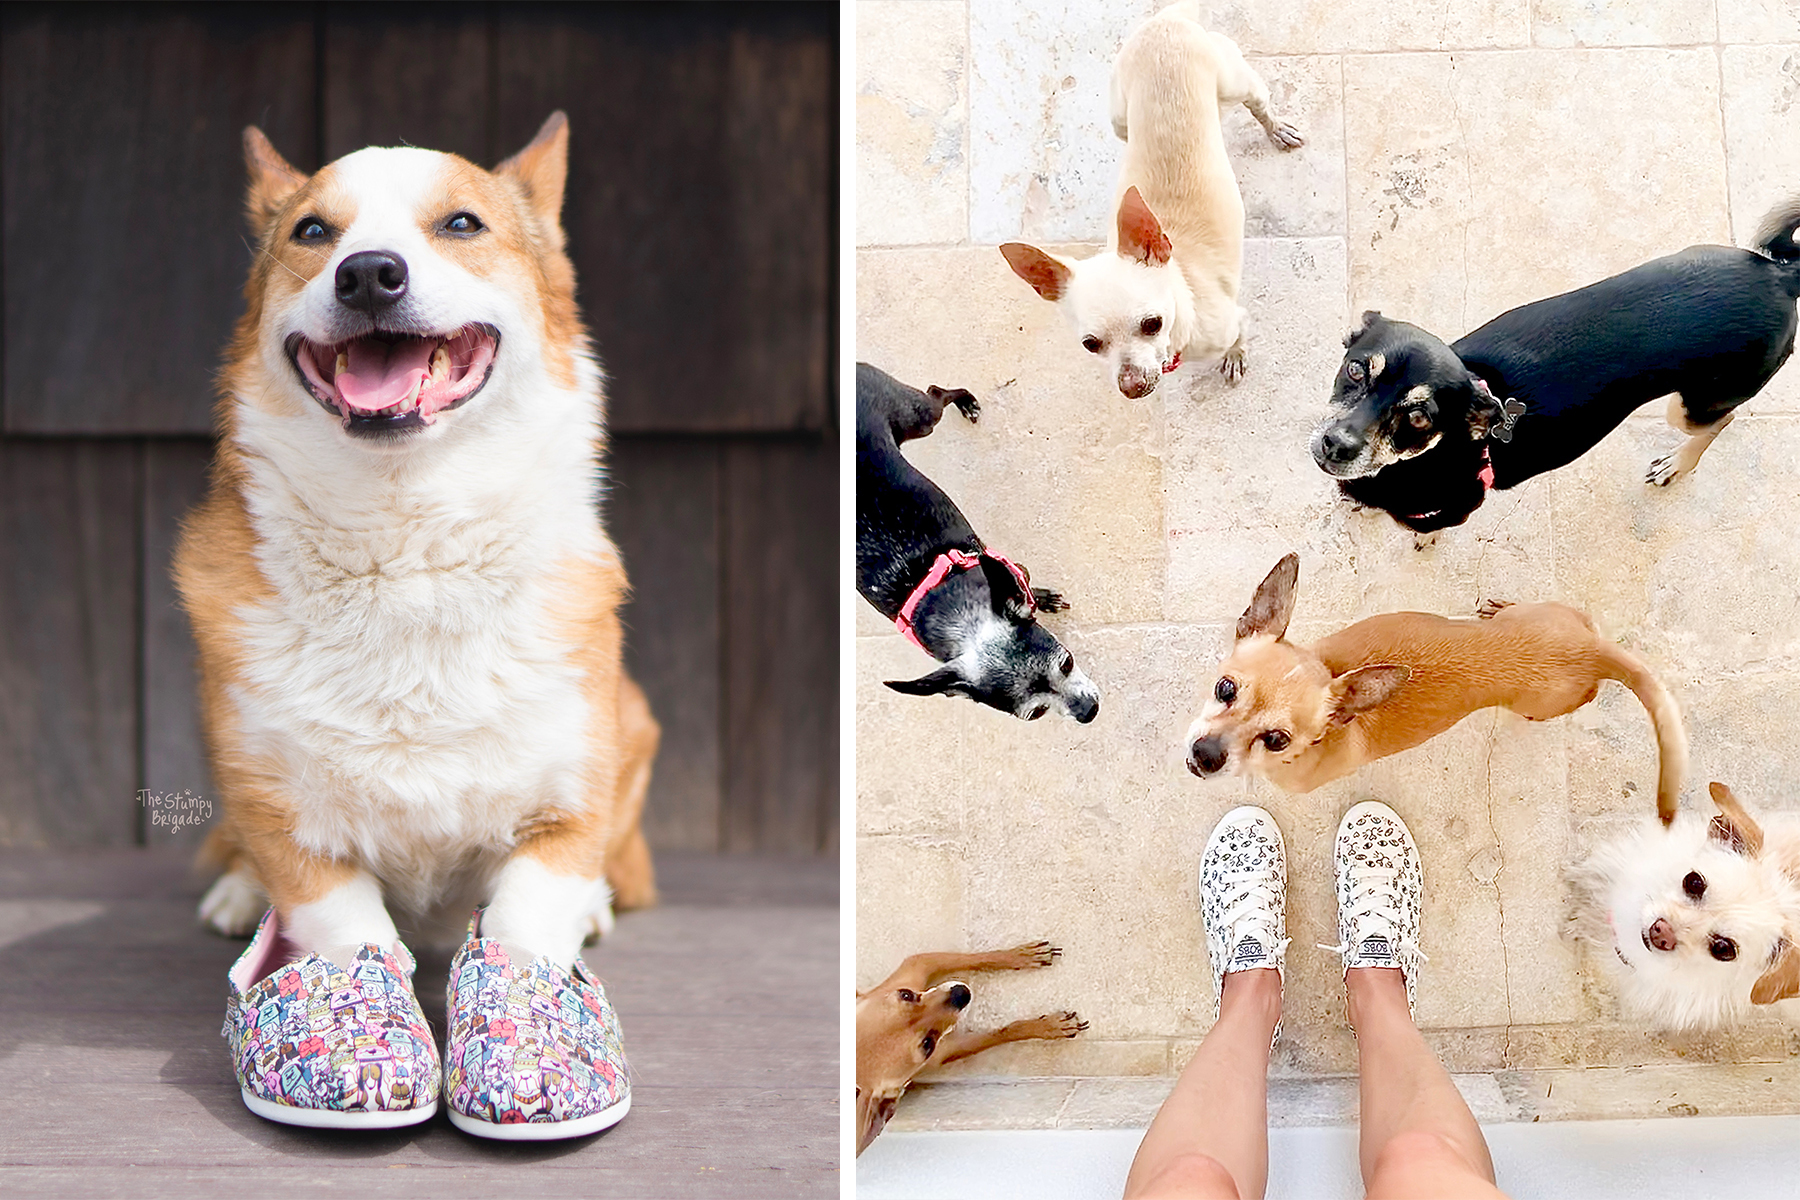 Skechers Donates Over $6 Million to Save Dogs and Cats | Business Wire